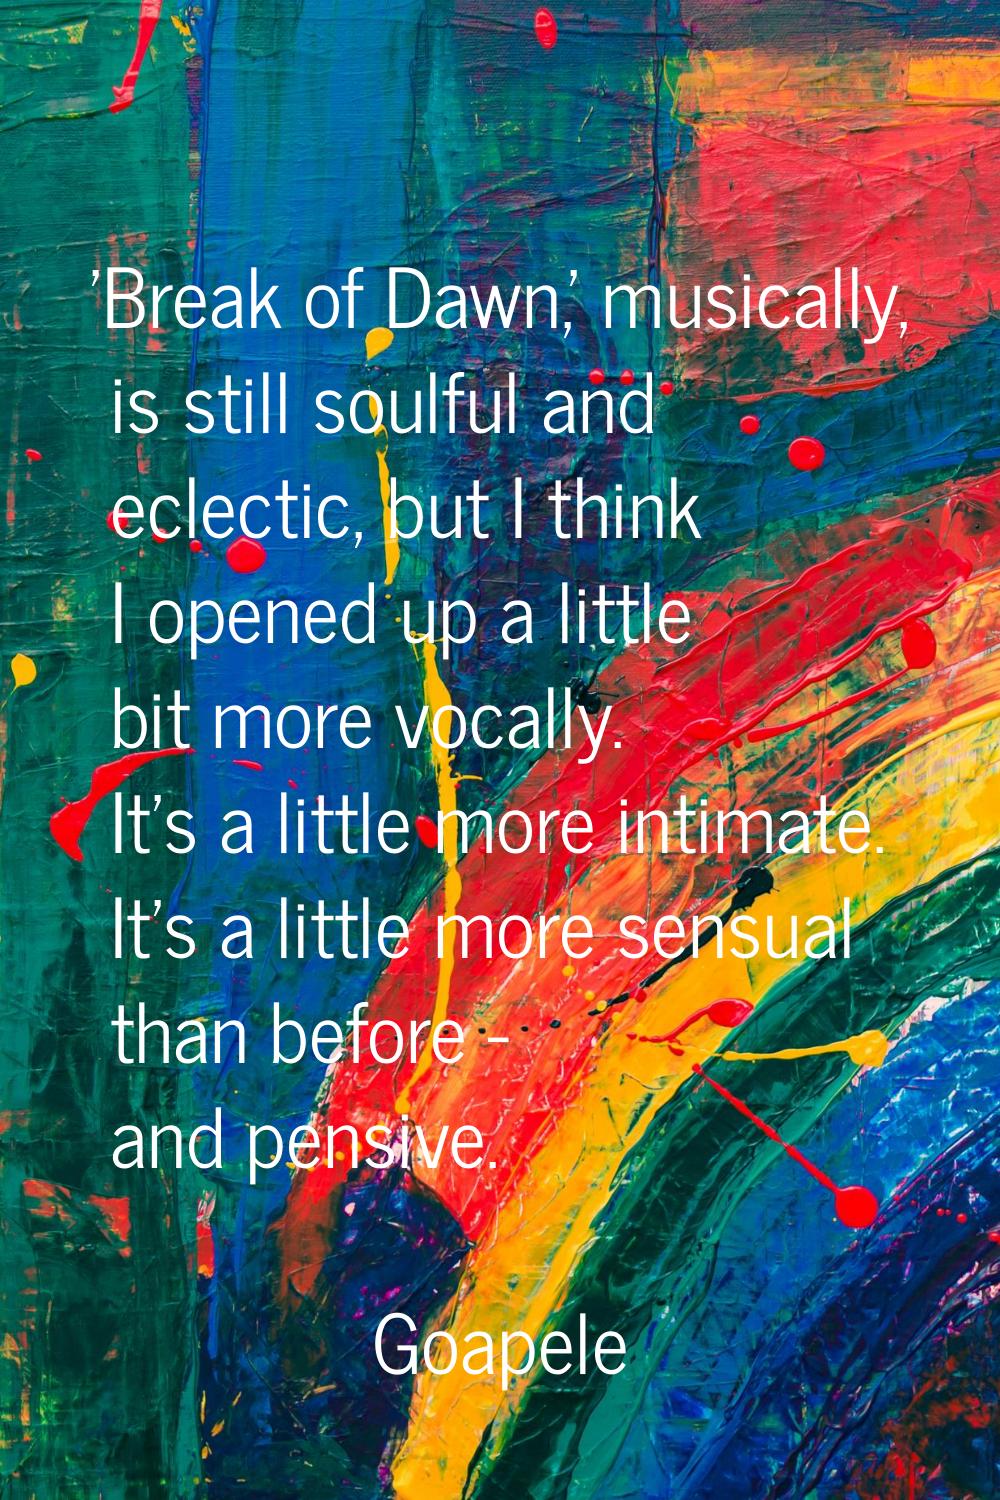 'Break of Dawn,' musically, is still soulful and eclectic, but I think I opened up a little bit mor